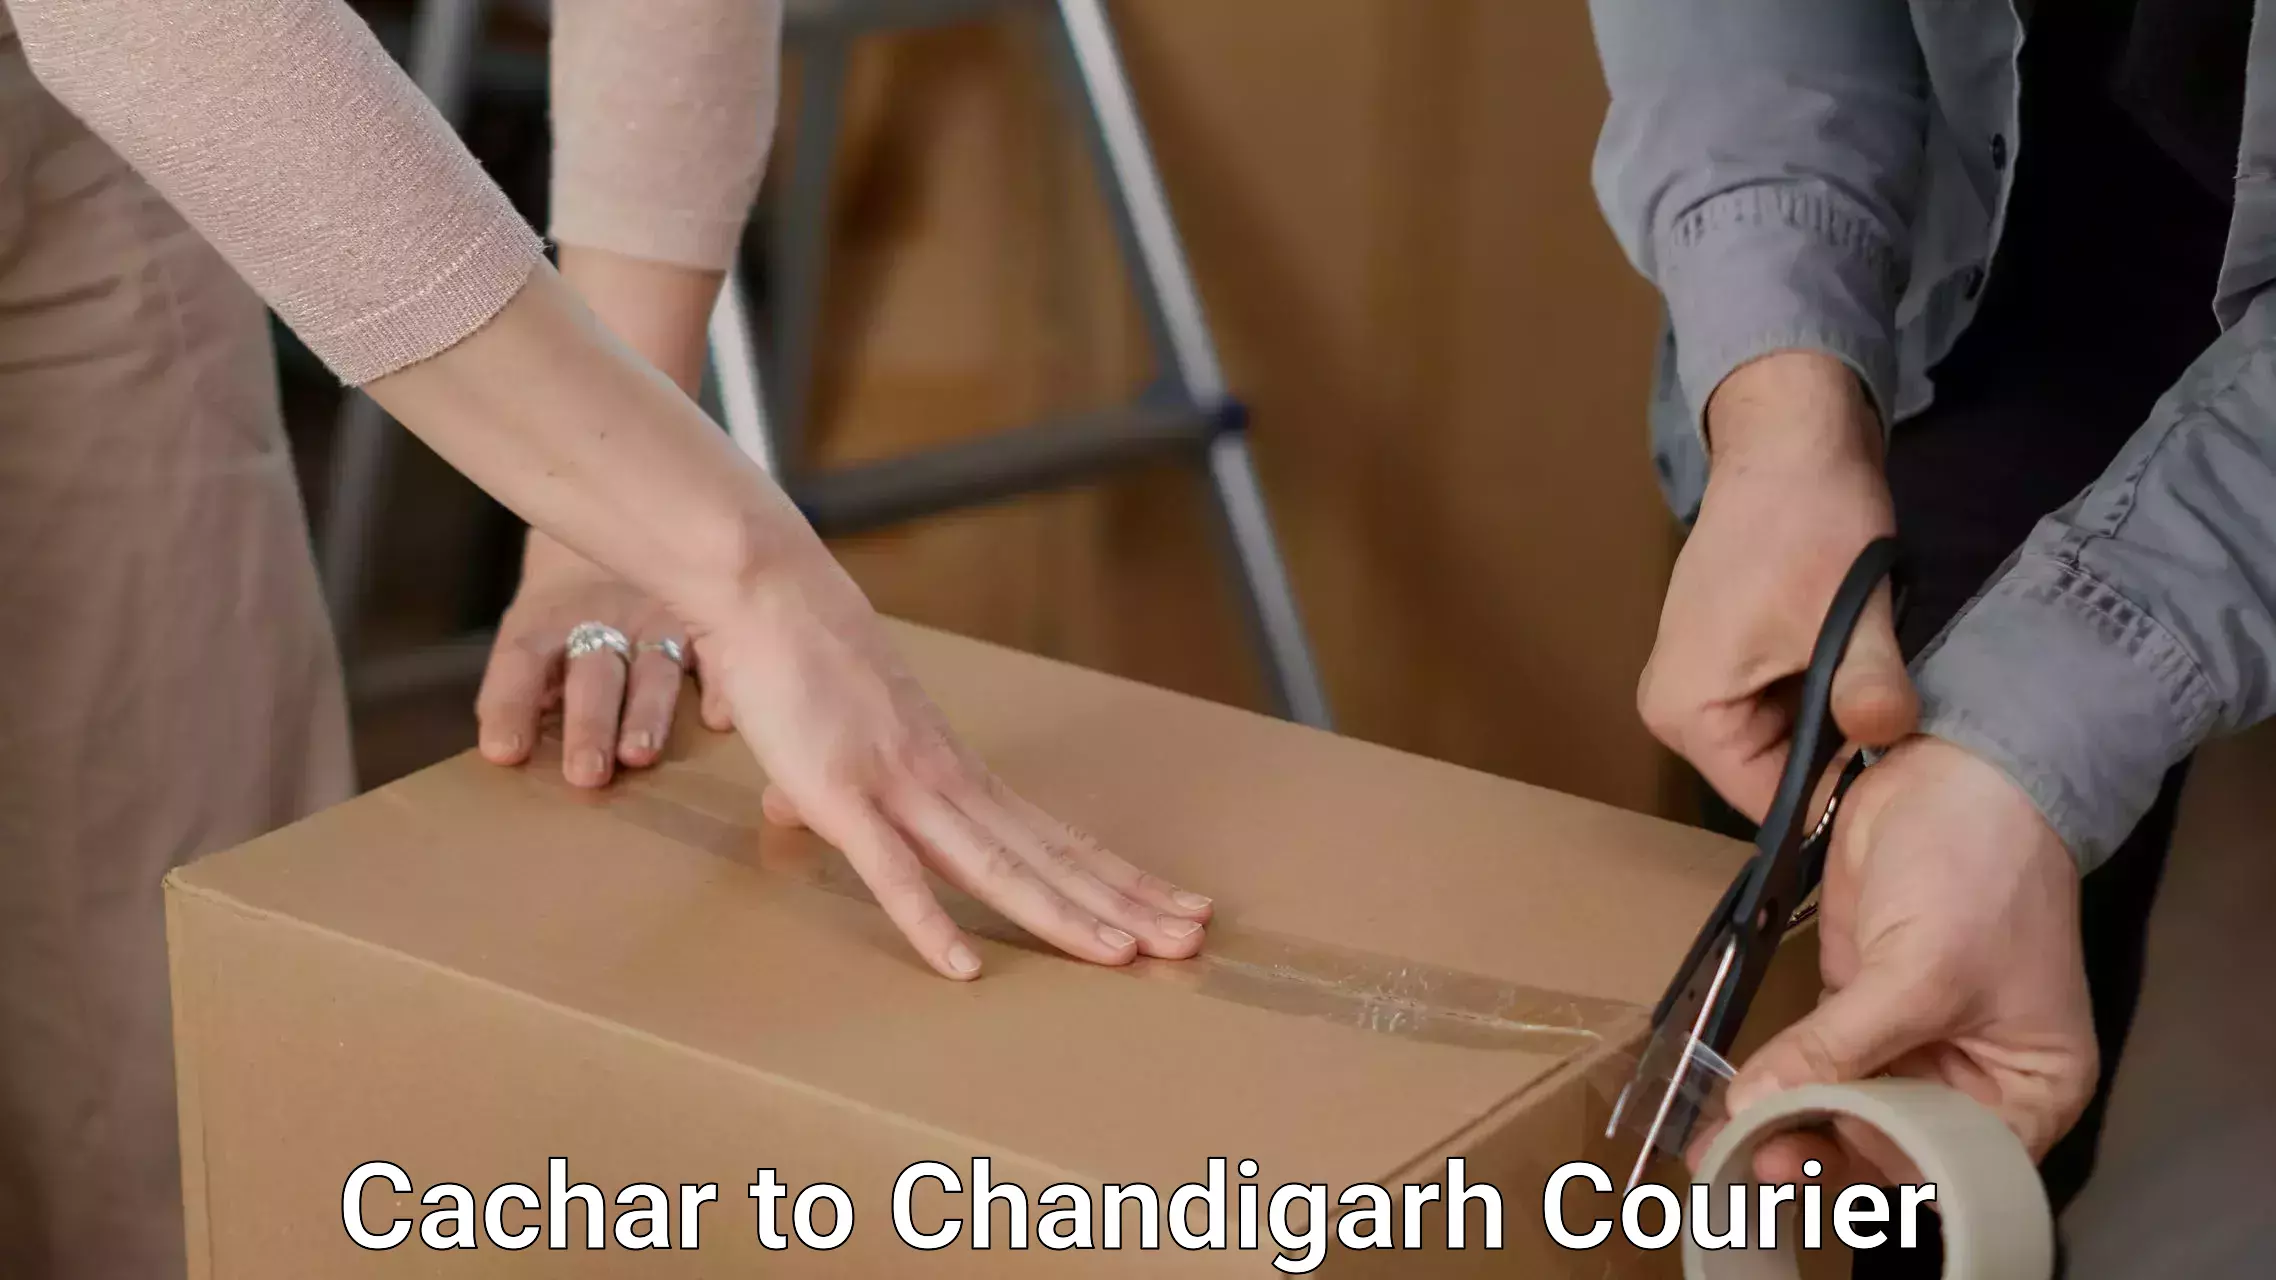 Moving and packing experts Cachar to Chandigarh